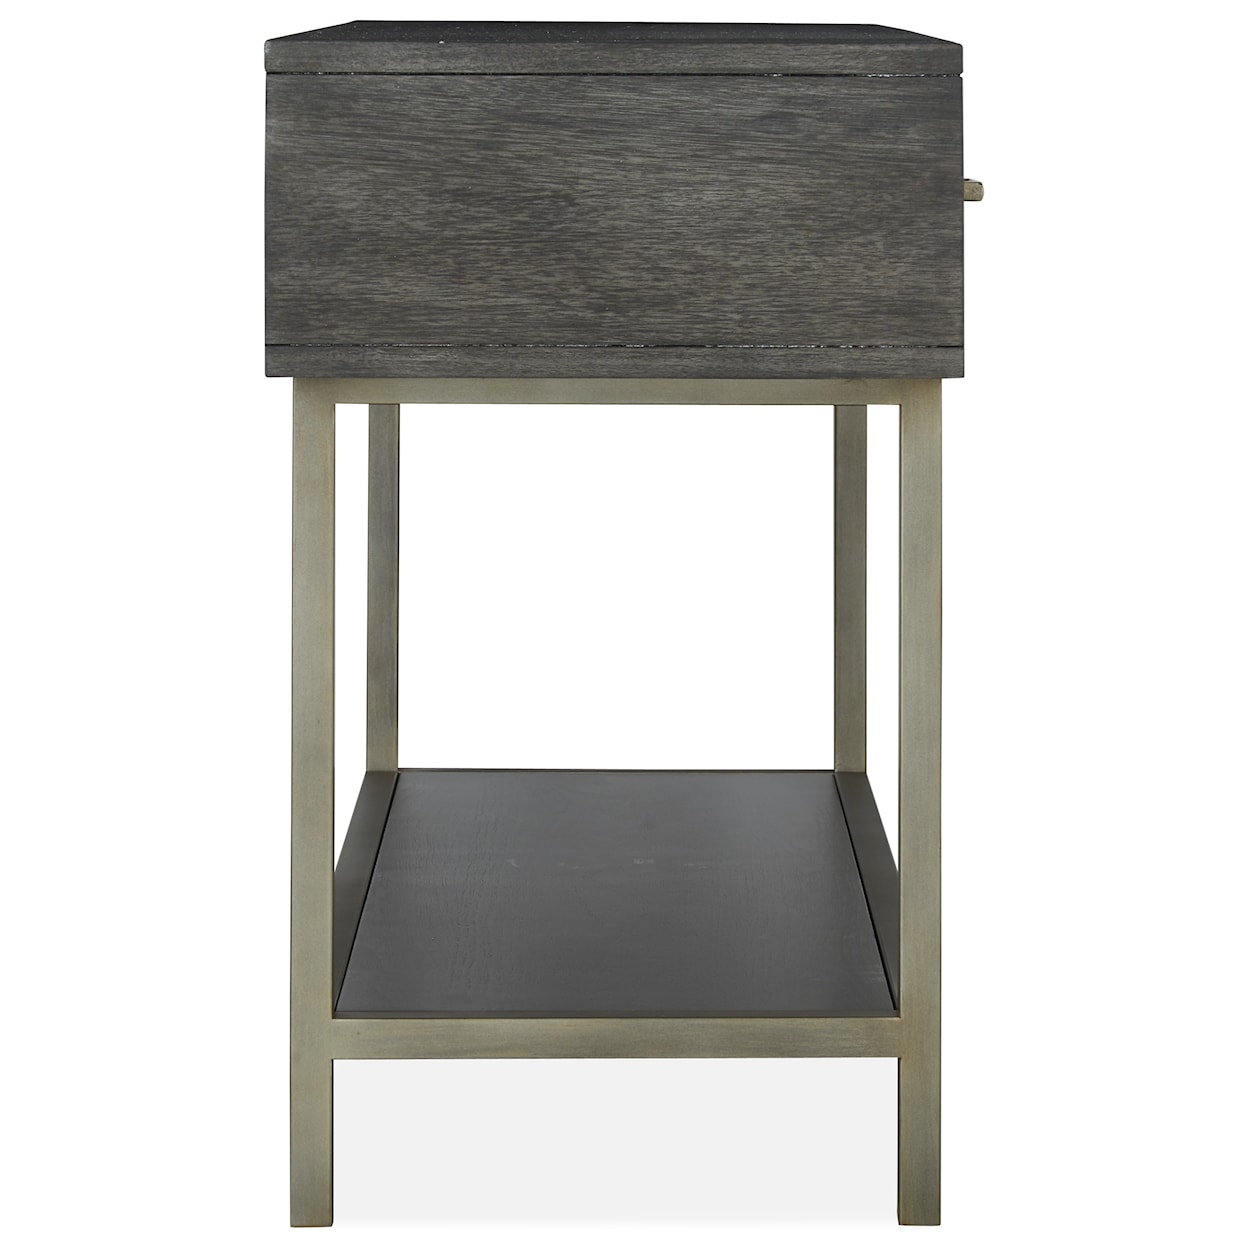 Magnussen Home Fulton Occasional Tables Rectangular End Table